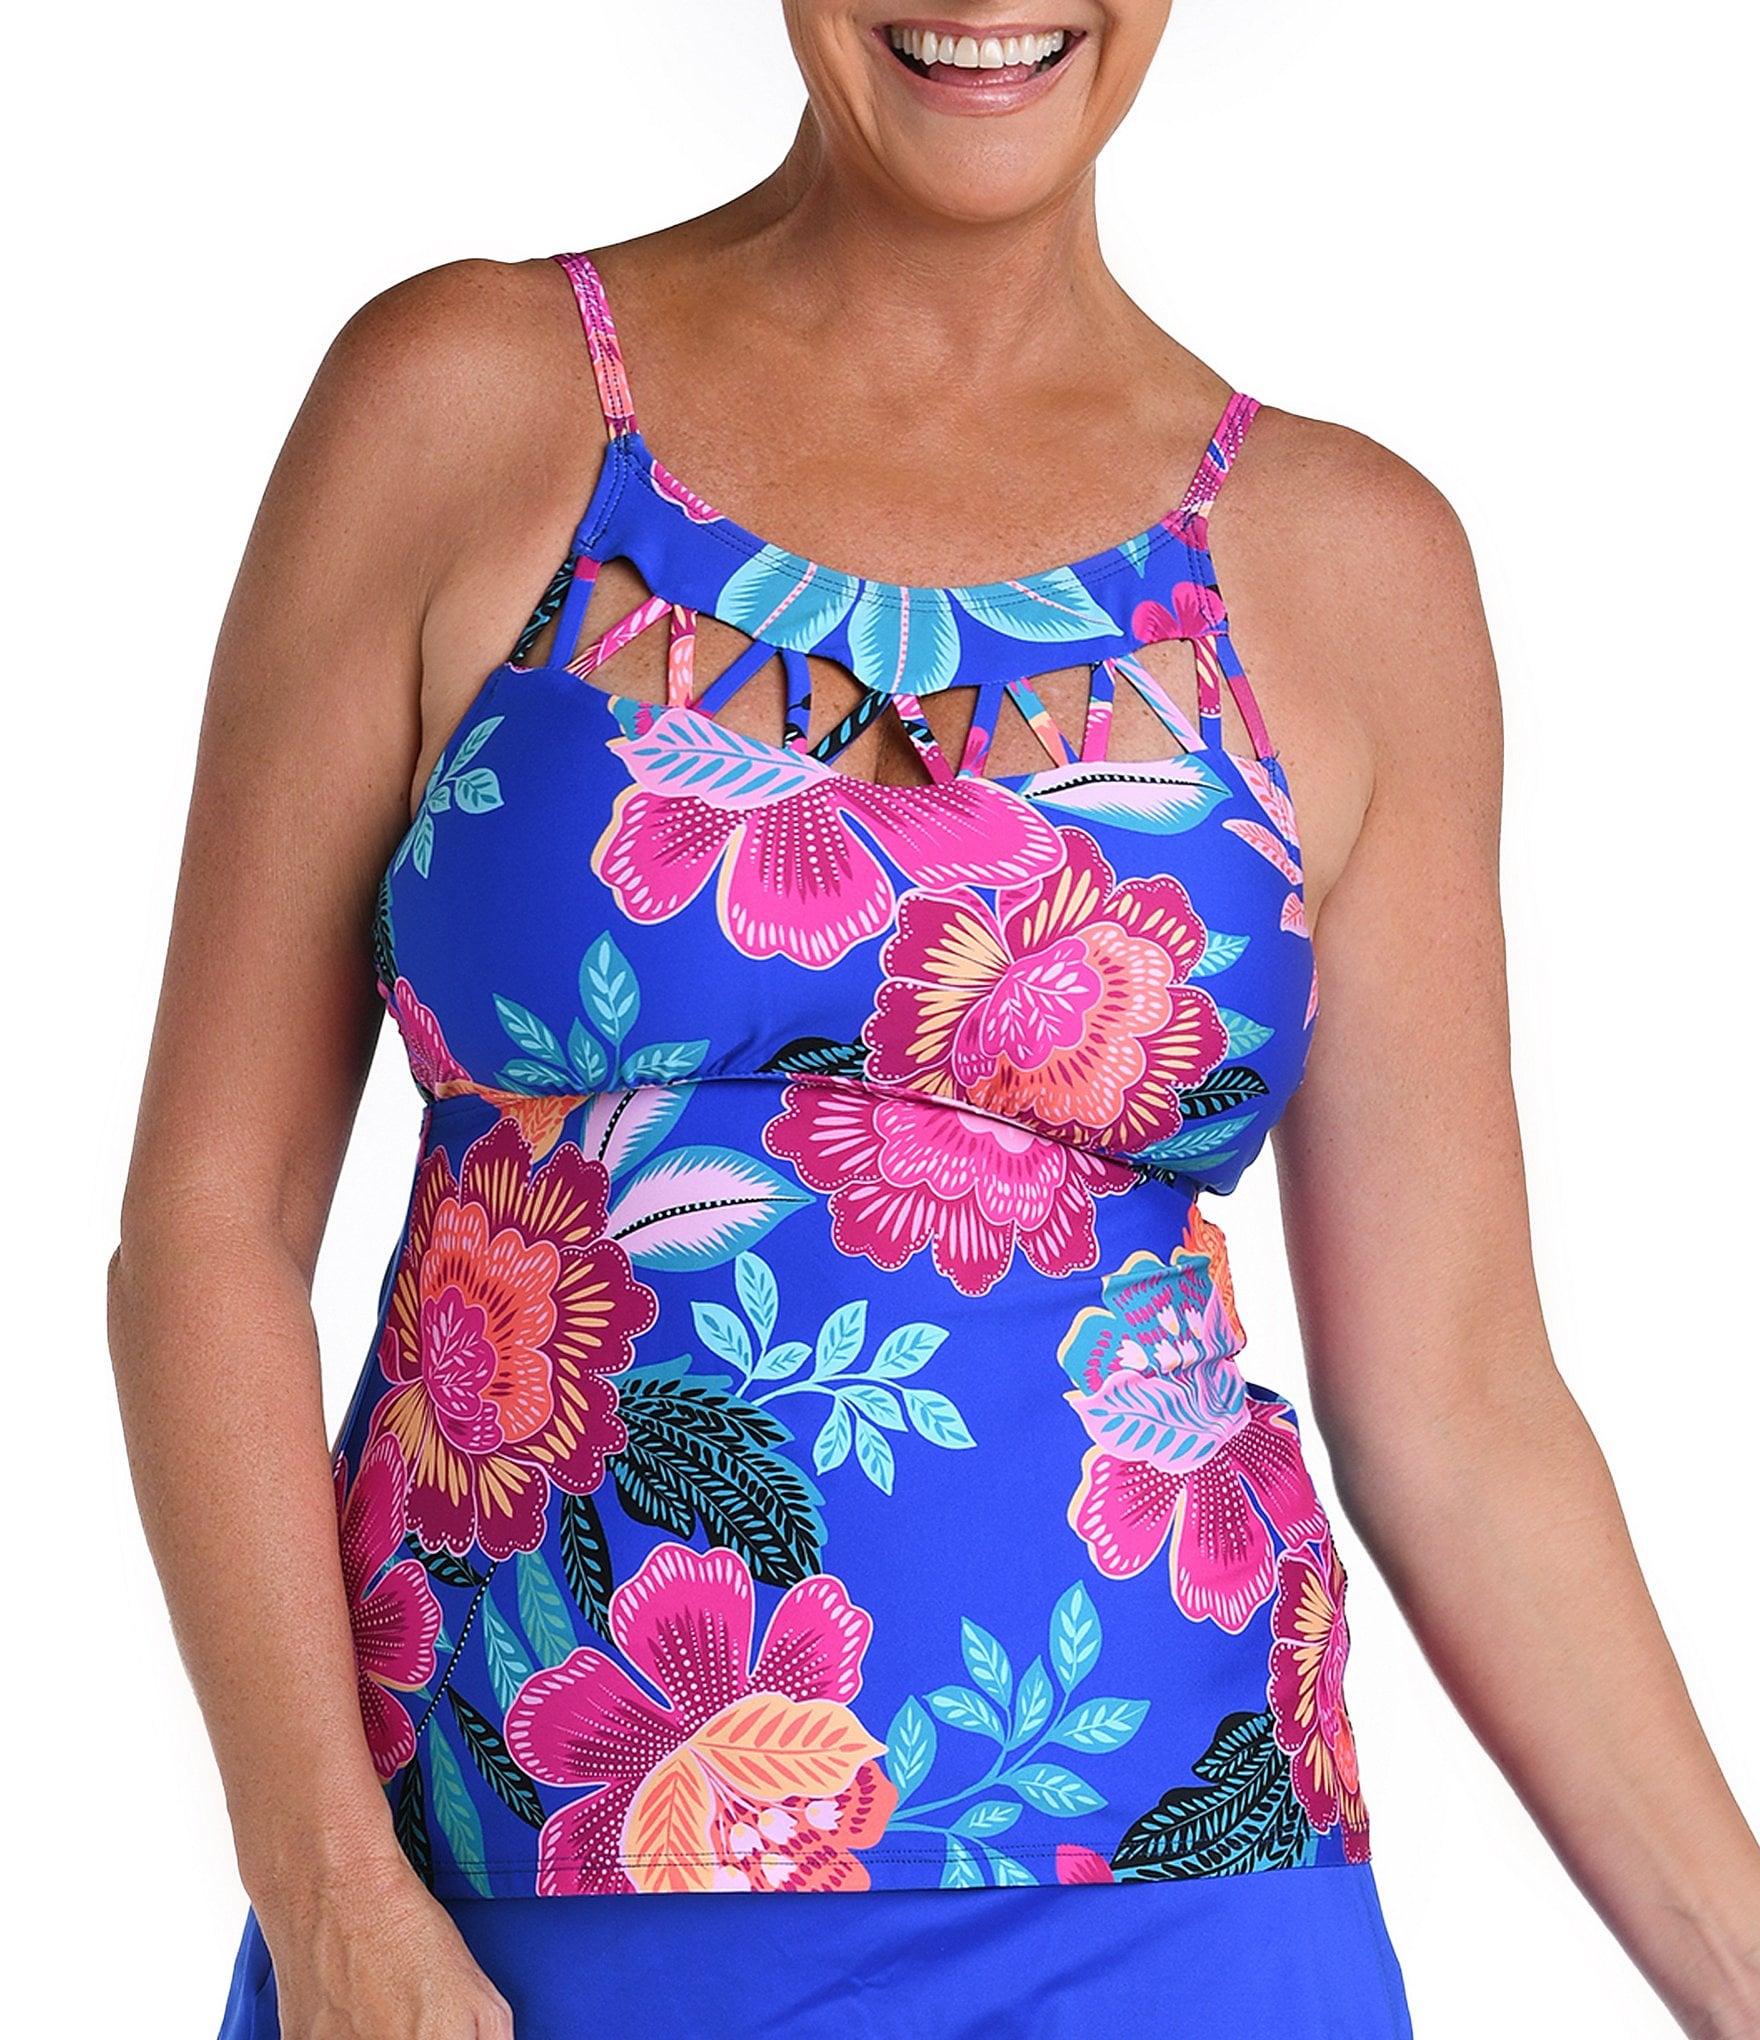 24th & Ocean Plus Size Sketched Floral Keyhole High Neck Underwire Tankini  Swim Top & Solid Tummy Control Swim Bottom